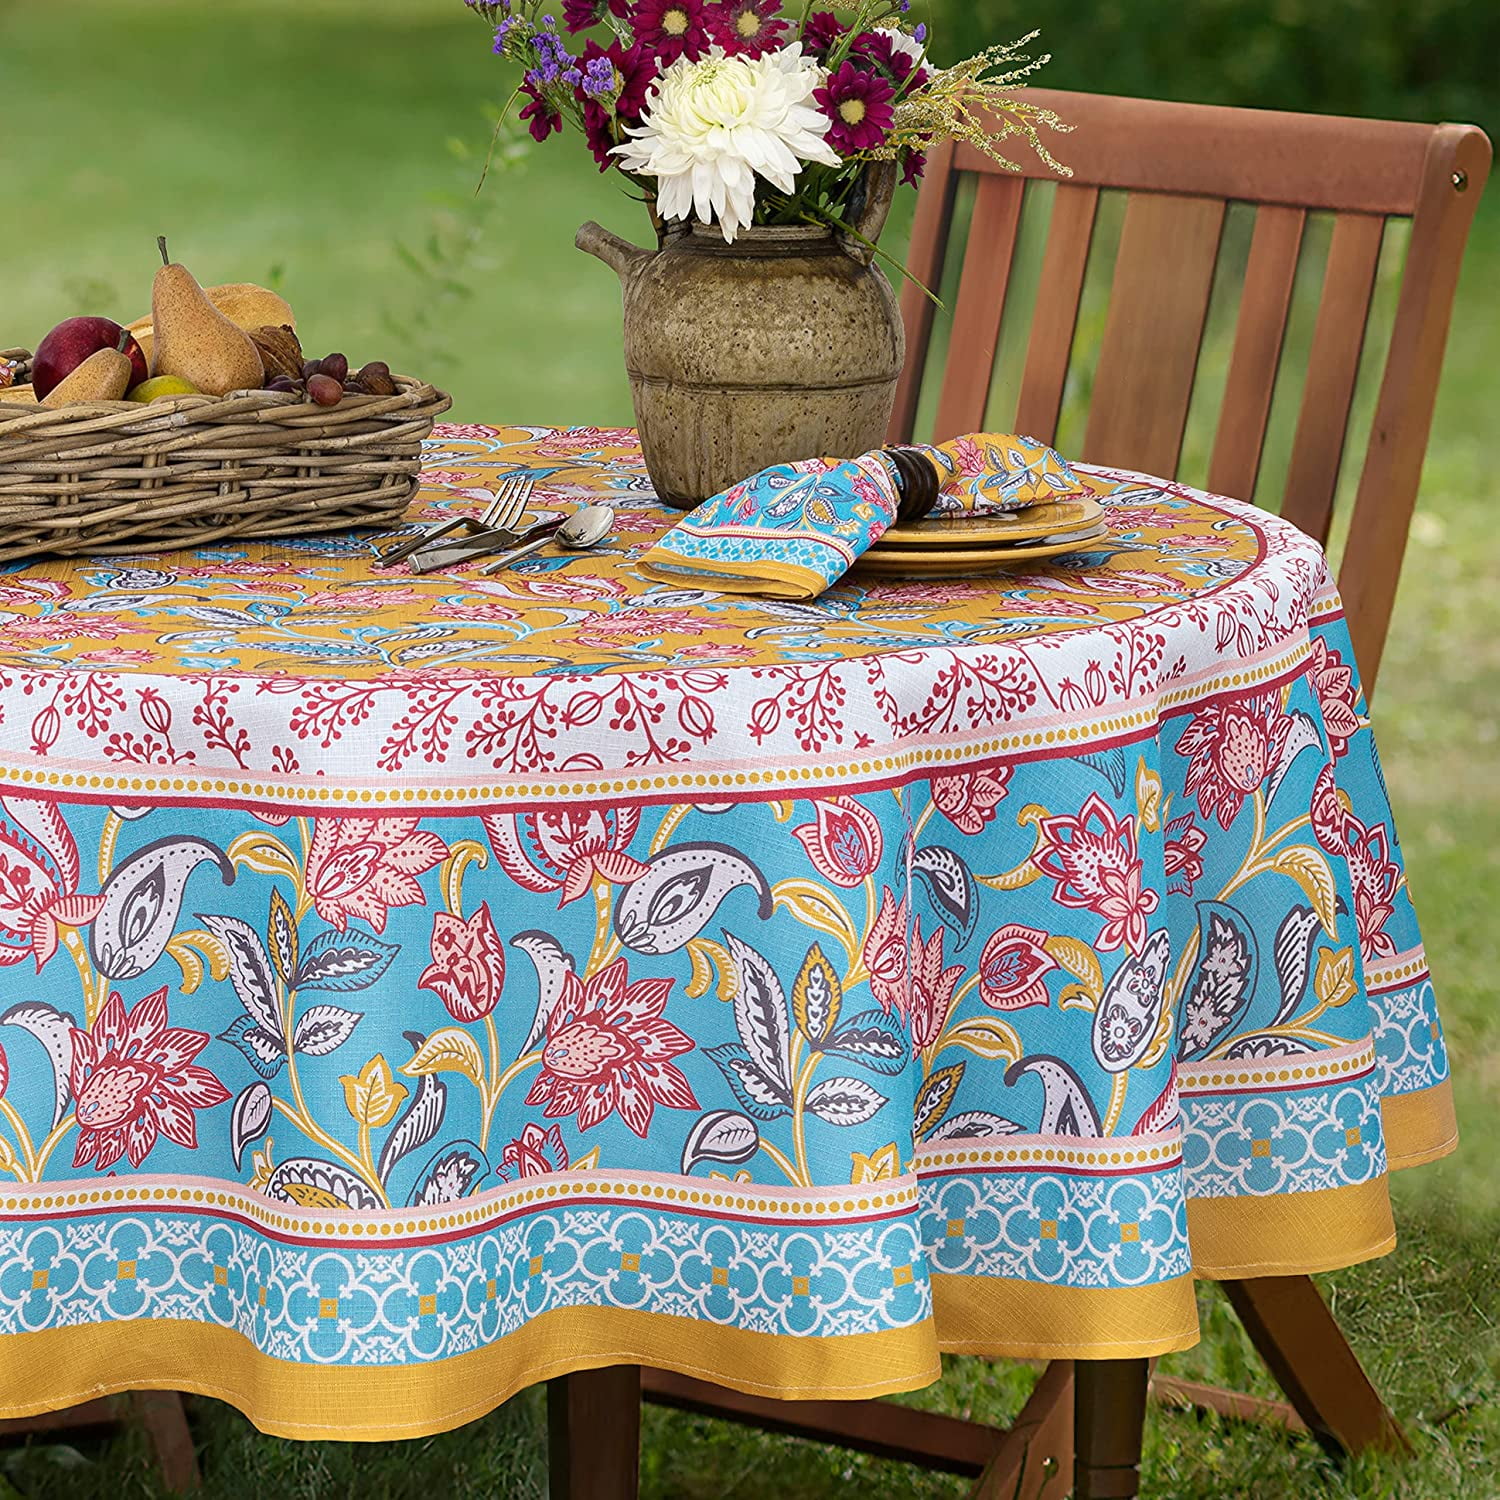 Belle Fleur Paisley Provence Bordered Print Country French Fabric Napkins  by Home Bargains Plus, Stain and Water Resistant, Wrinkle Free Floral  Tablecloth, Wrinkle Free Napkins, Set of 8 Napkins 